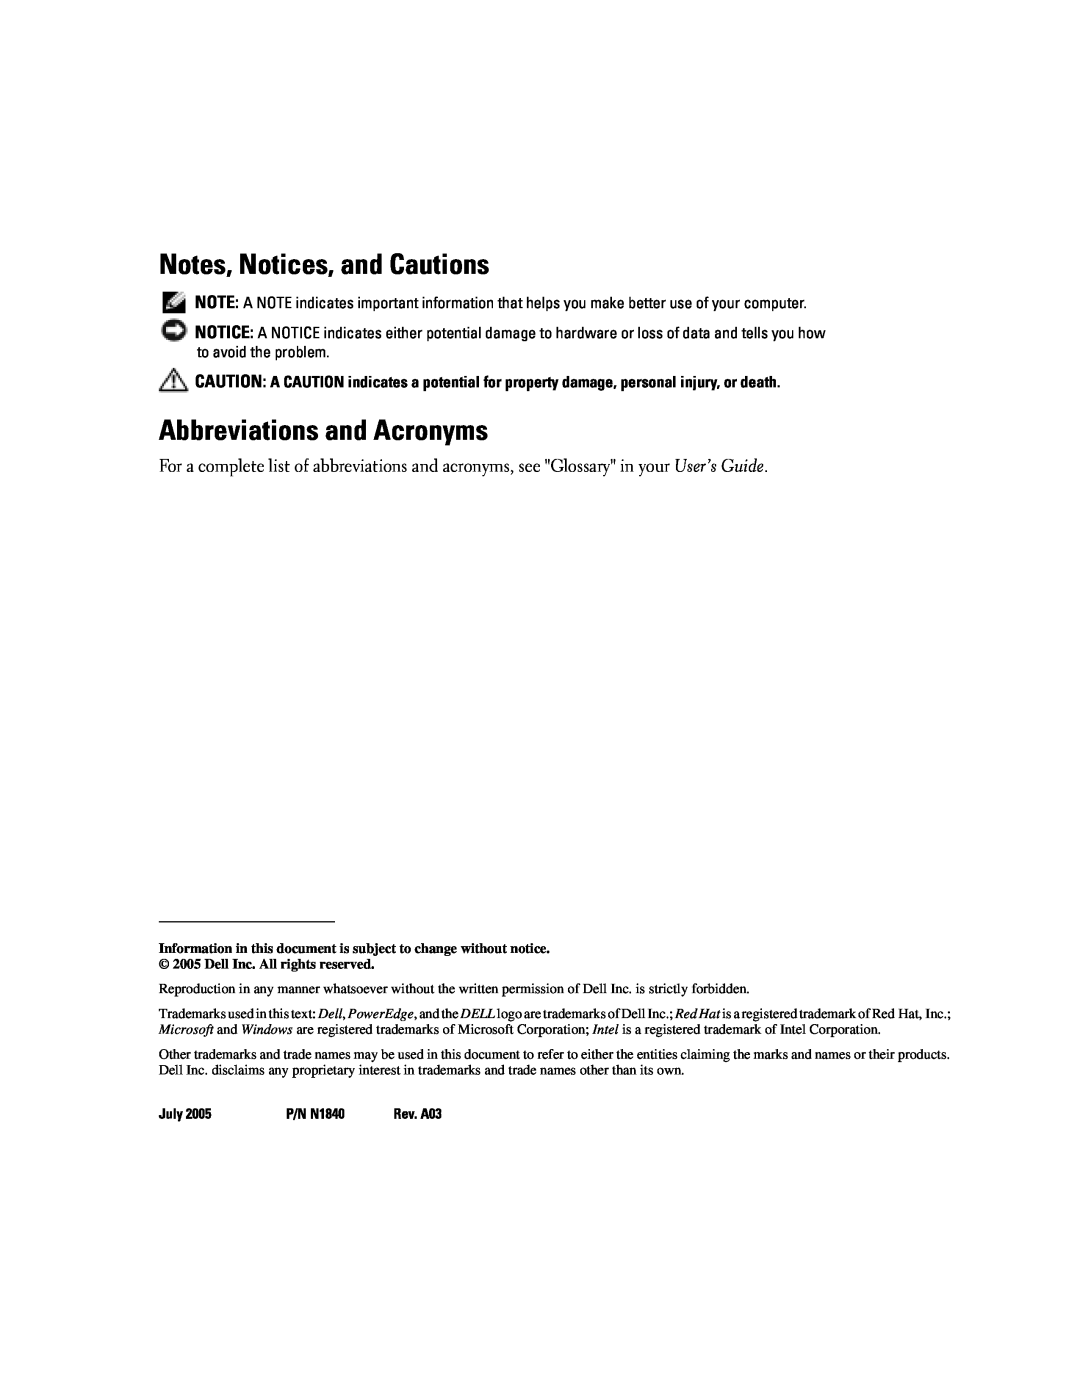 Dell 2850 manual Notes, Notices, and Cautions, Abbreviations and Acronyms, July, P/N N1840 